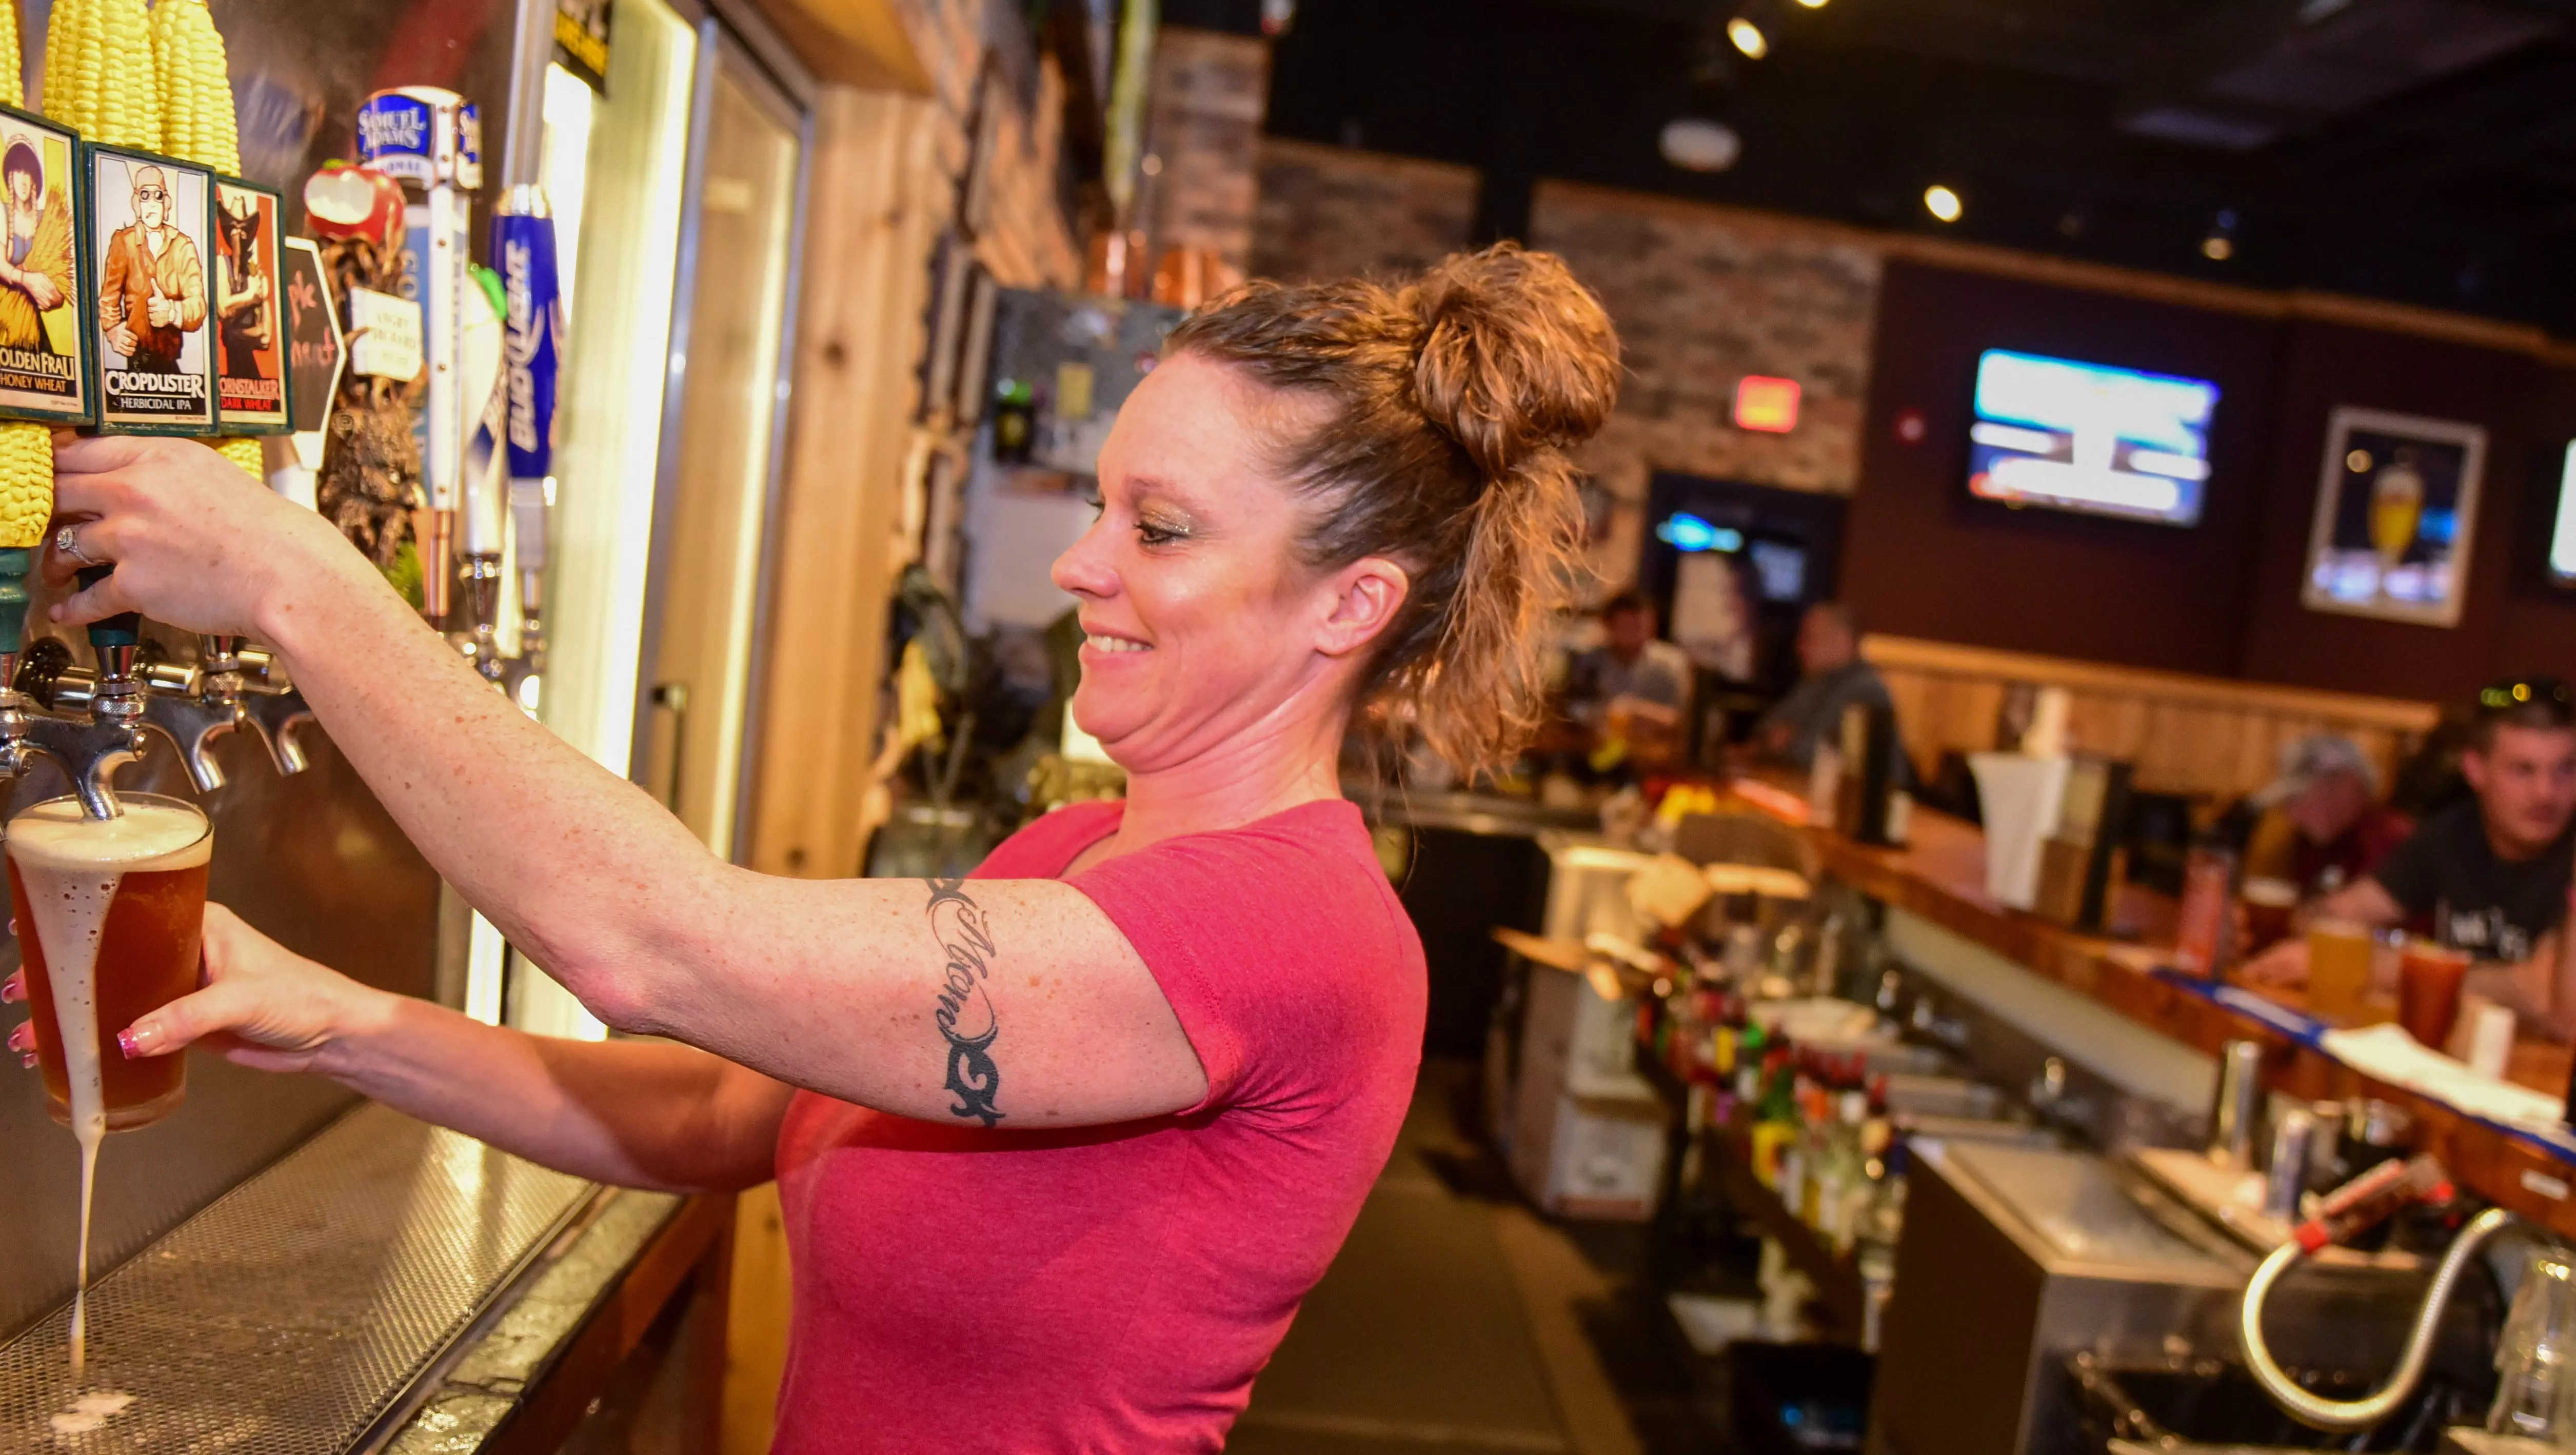 Bartender Kim Staker draws a craft ale made by Thunderhead Brewing at Chicken Coop Sports Bar & Grill in Urbandale.